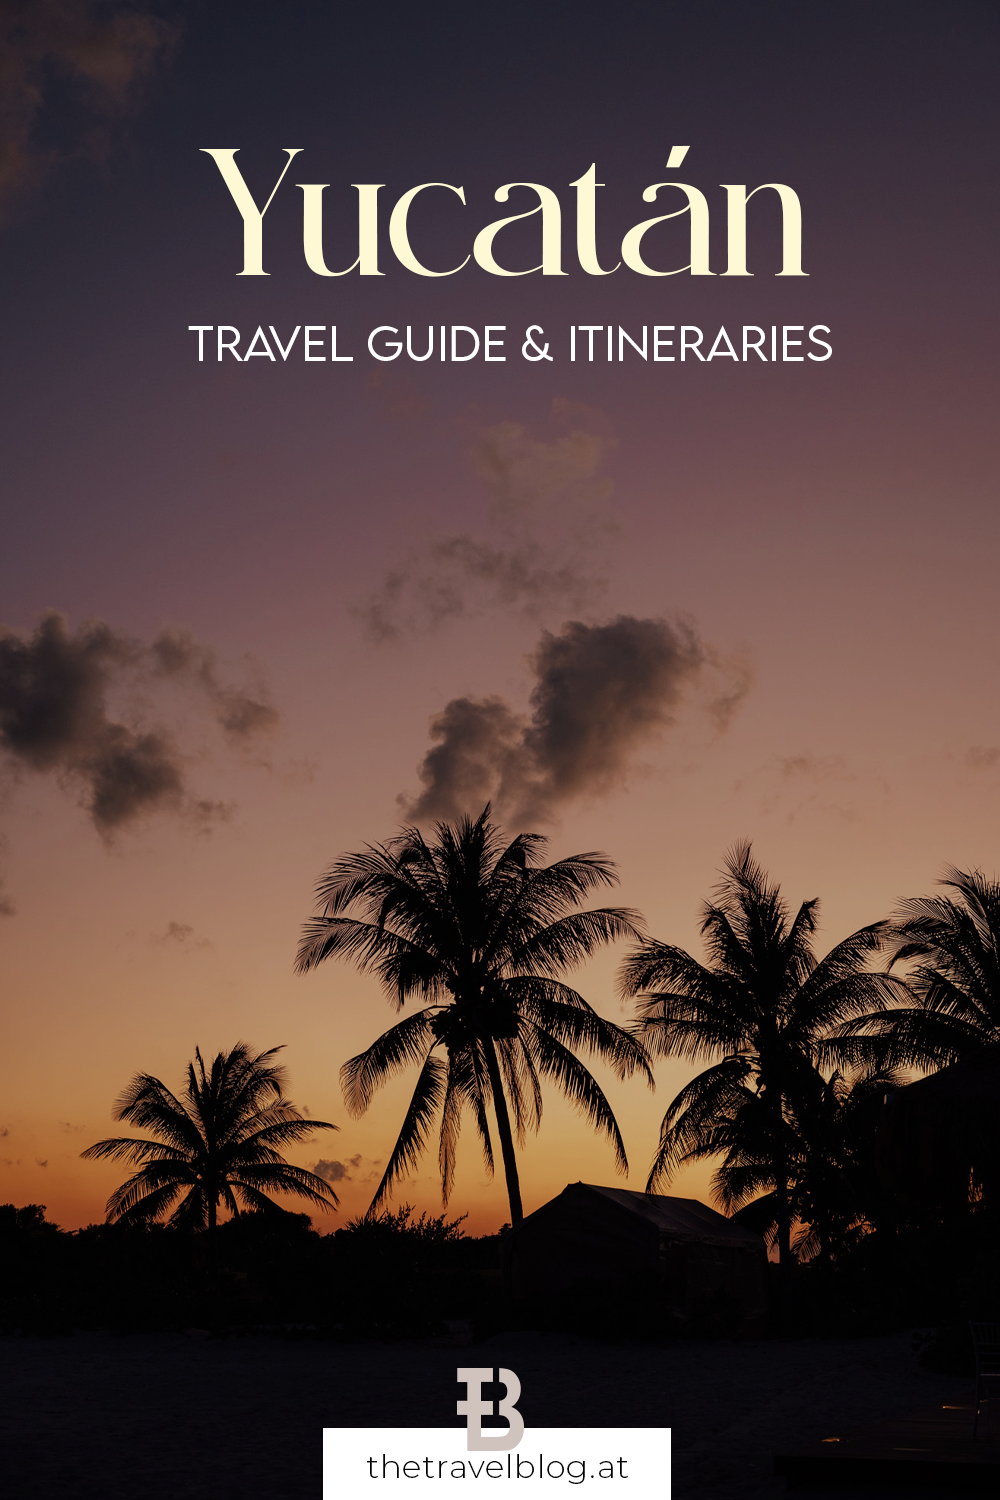 Travel guide and road trip itineraries for one or two weeks in Yucatán Mexico